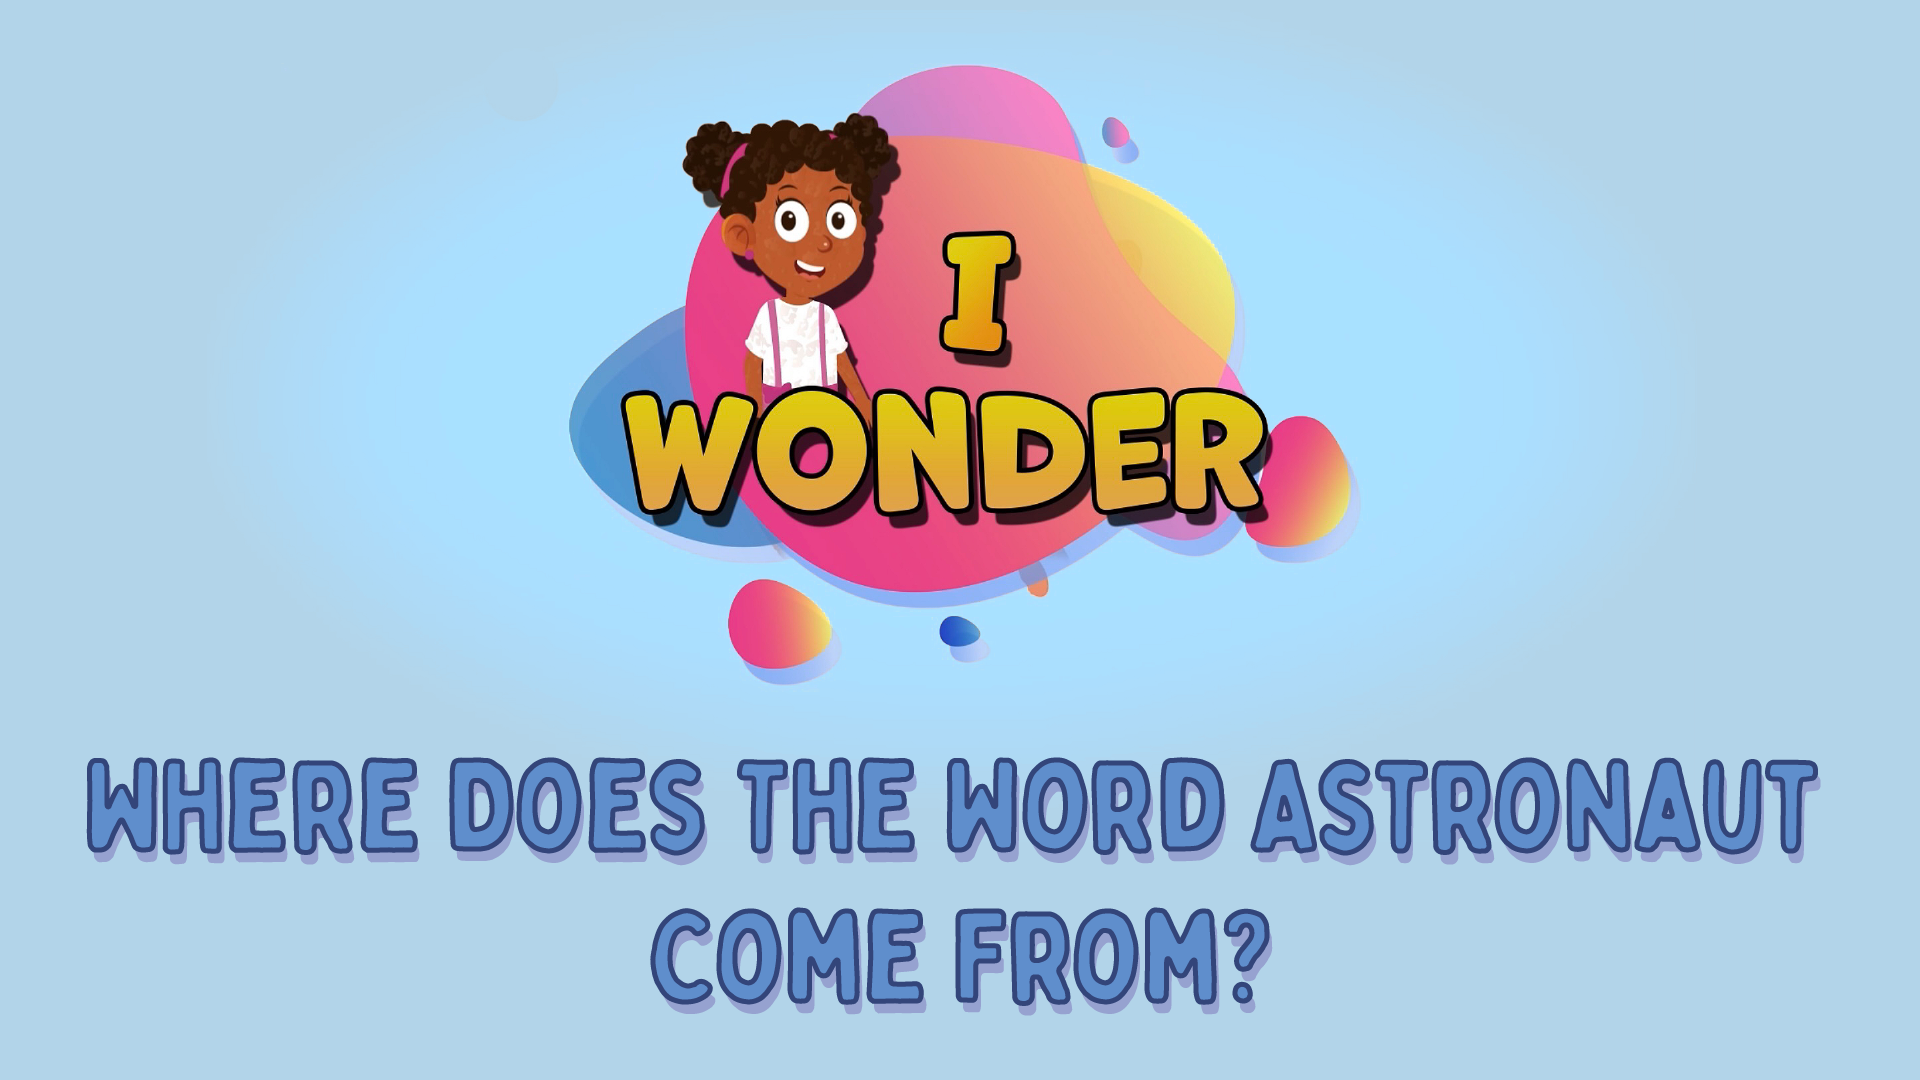 Where Does The Word Astronaut Come From?